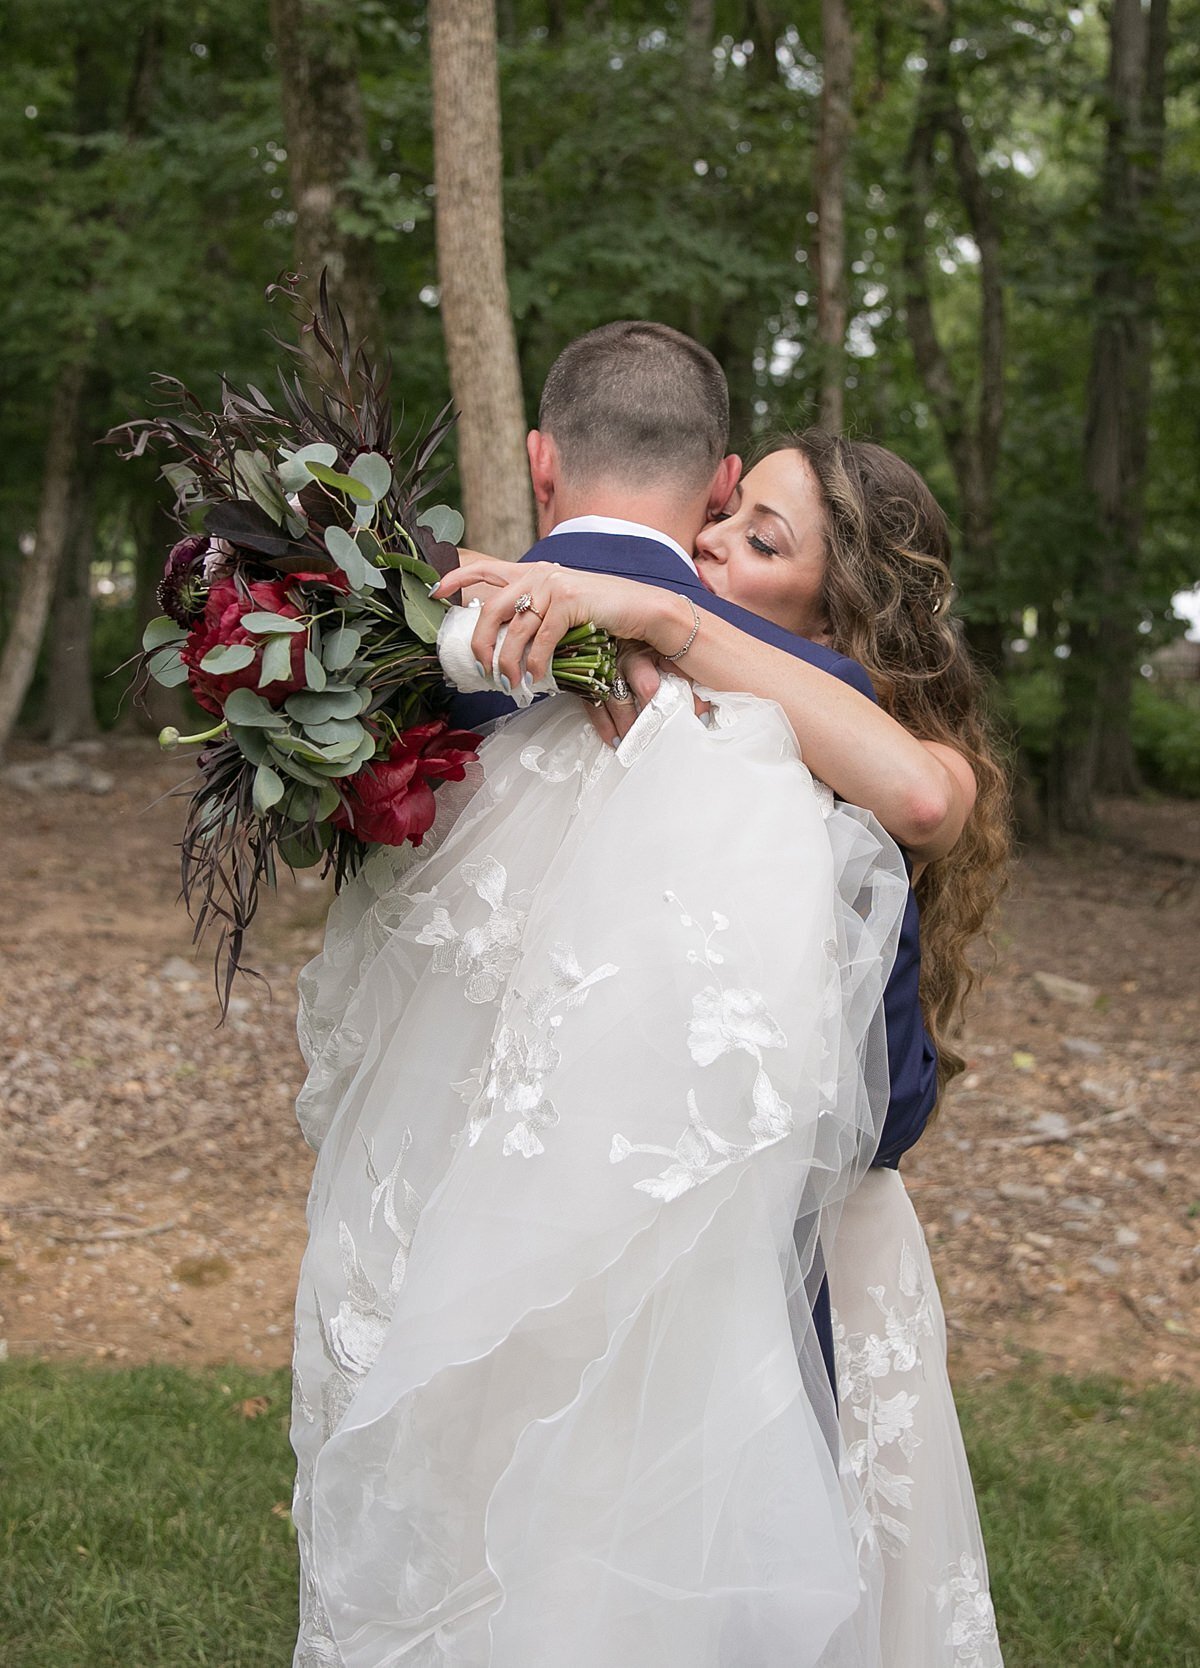 The bride and groom, wrapped up in the lace train of her wedding gown, embrace and kiss in the woods while holding the bridal bouquet of burgundy ranunculus, blush roses, red peonies and burgundy roses.